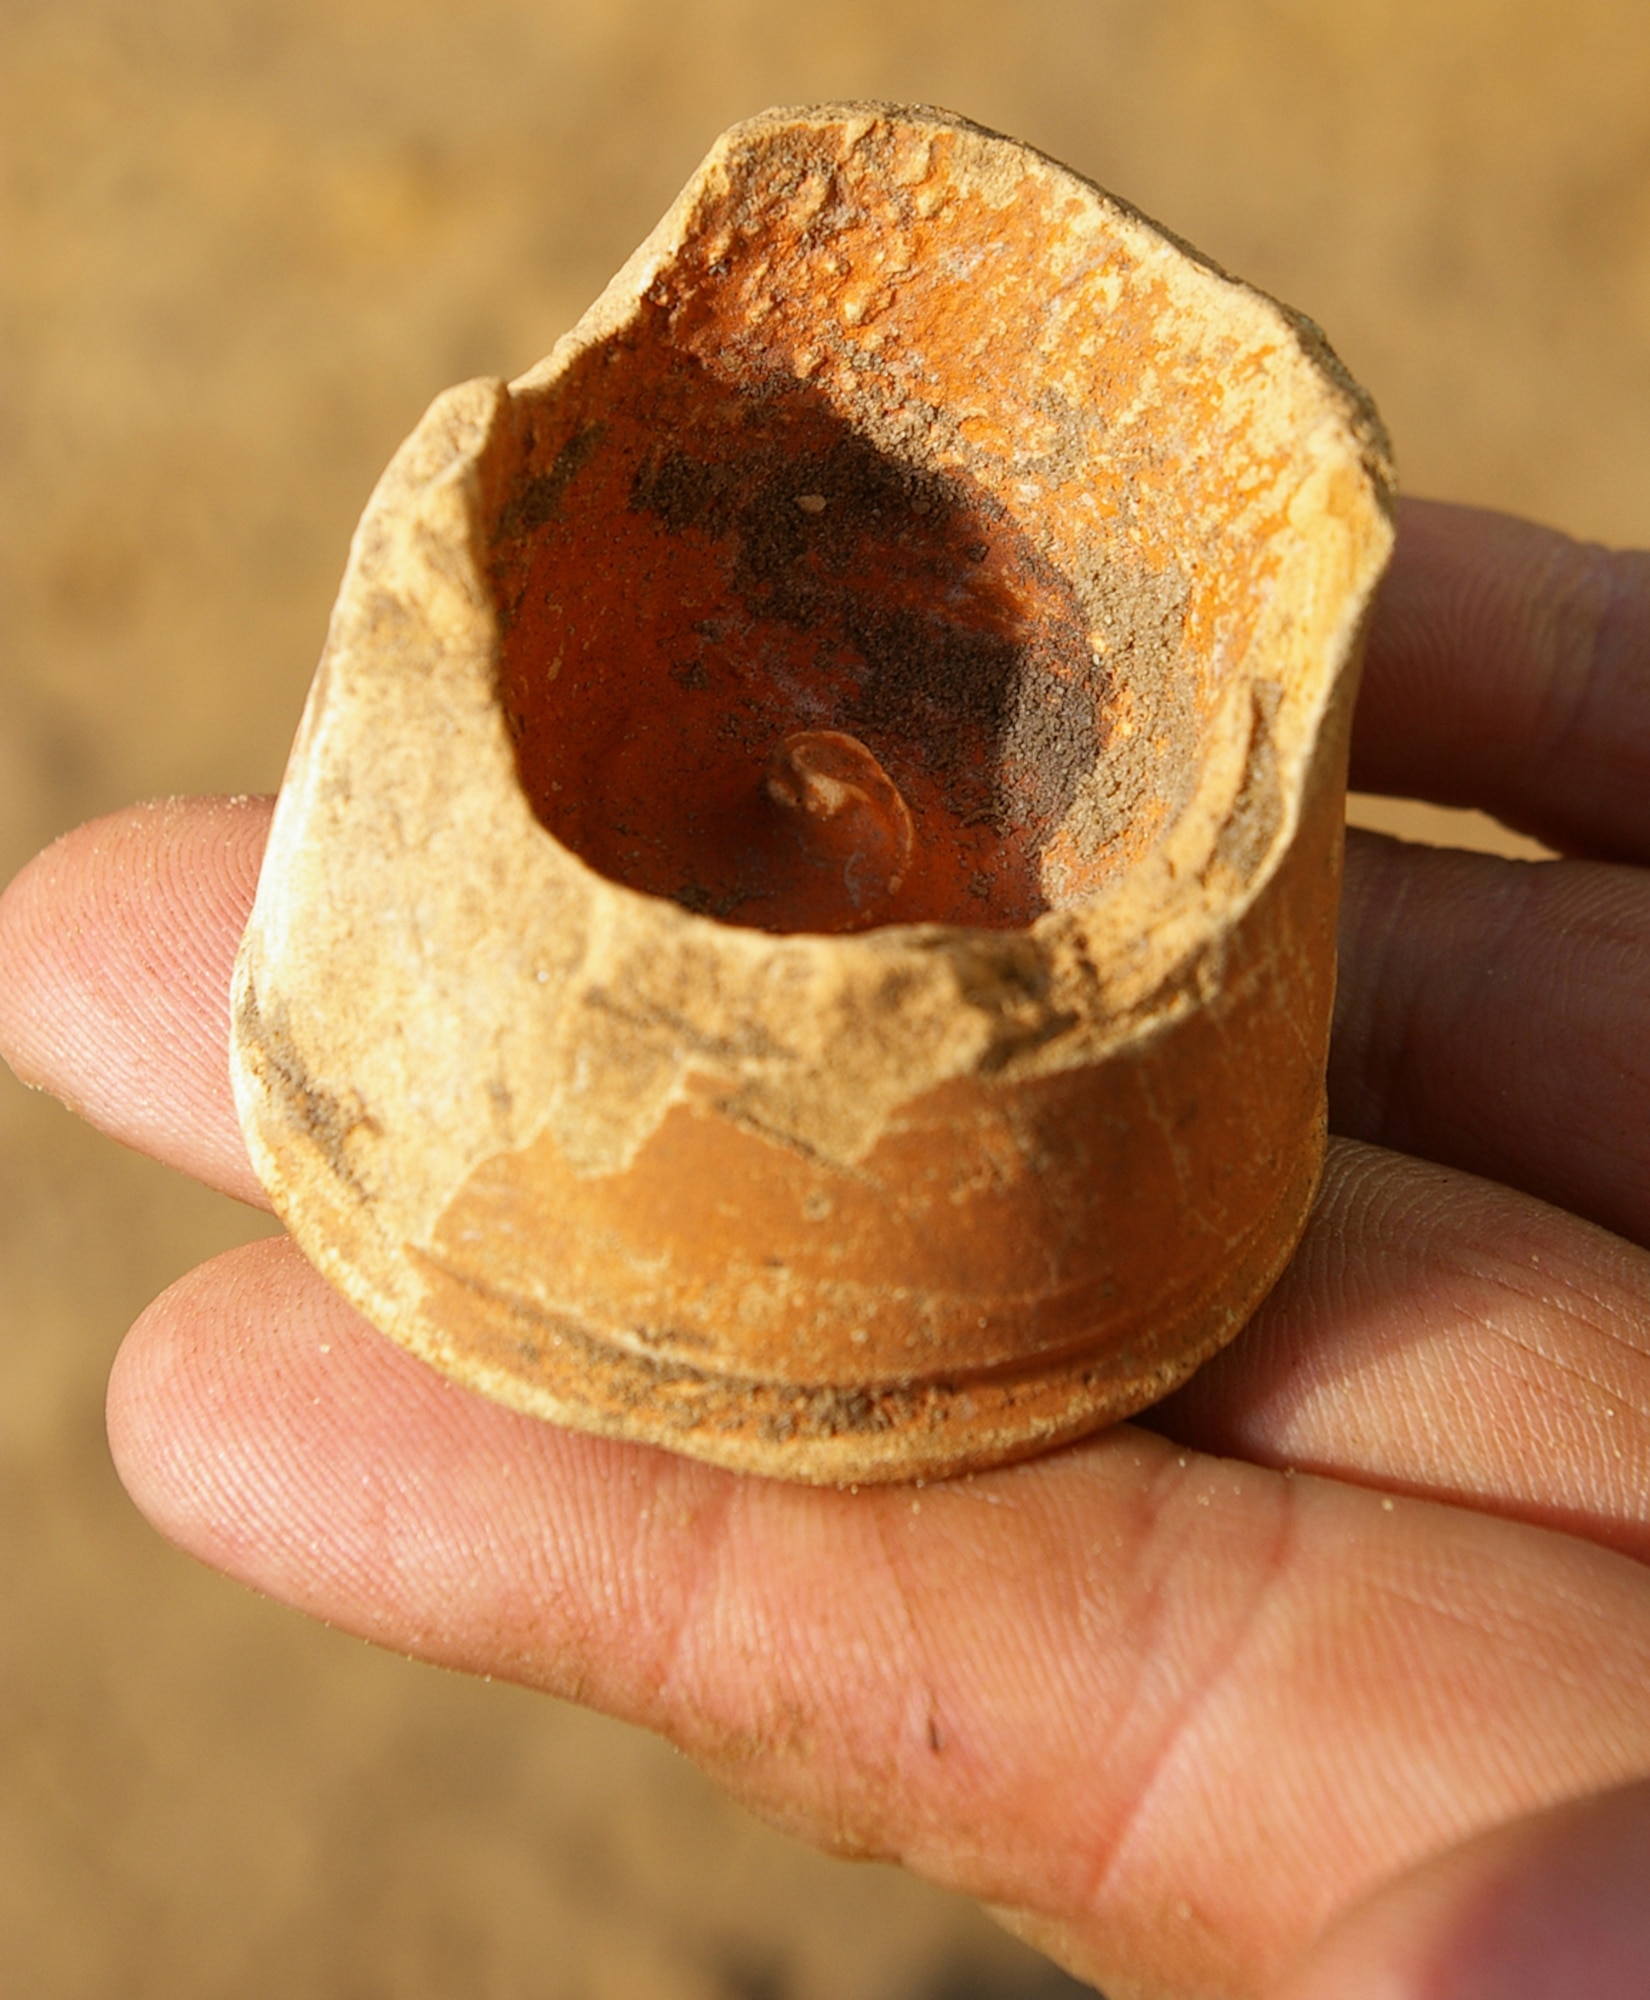 A piece of pottery, thought to be Roman, was found at the RAF Mildenhall officers' housing area in Beck Row during an archeological dig by the Suffolk County Council archeological service. A human skeleton was also discovered March 12, and was finally uncovered March 14. The skeleton has now been removed from the area and will be studied by archeology specialists. (Air Force photo by Karen Abeyasekere)